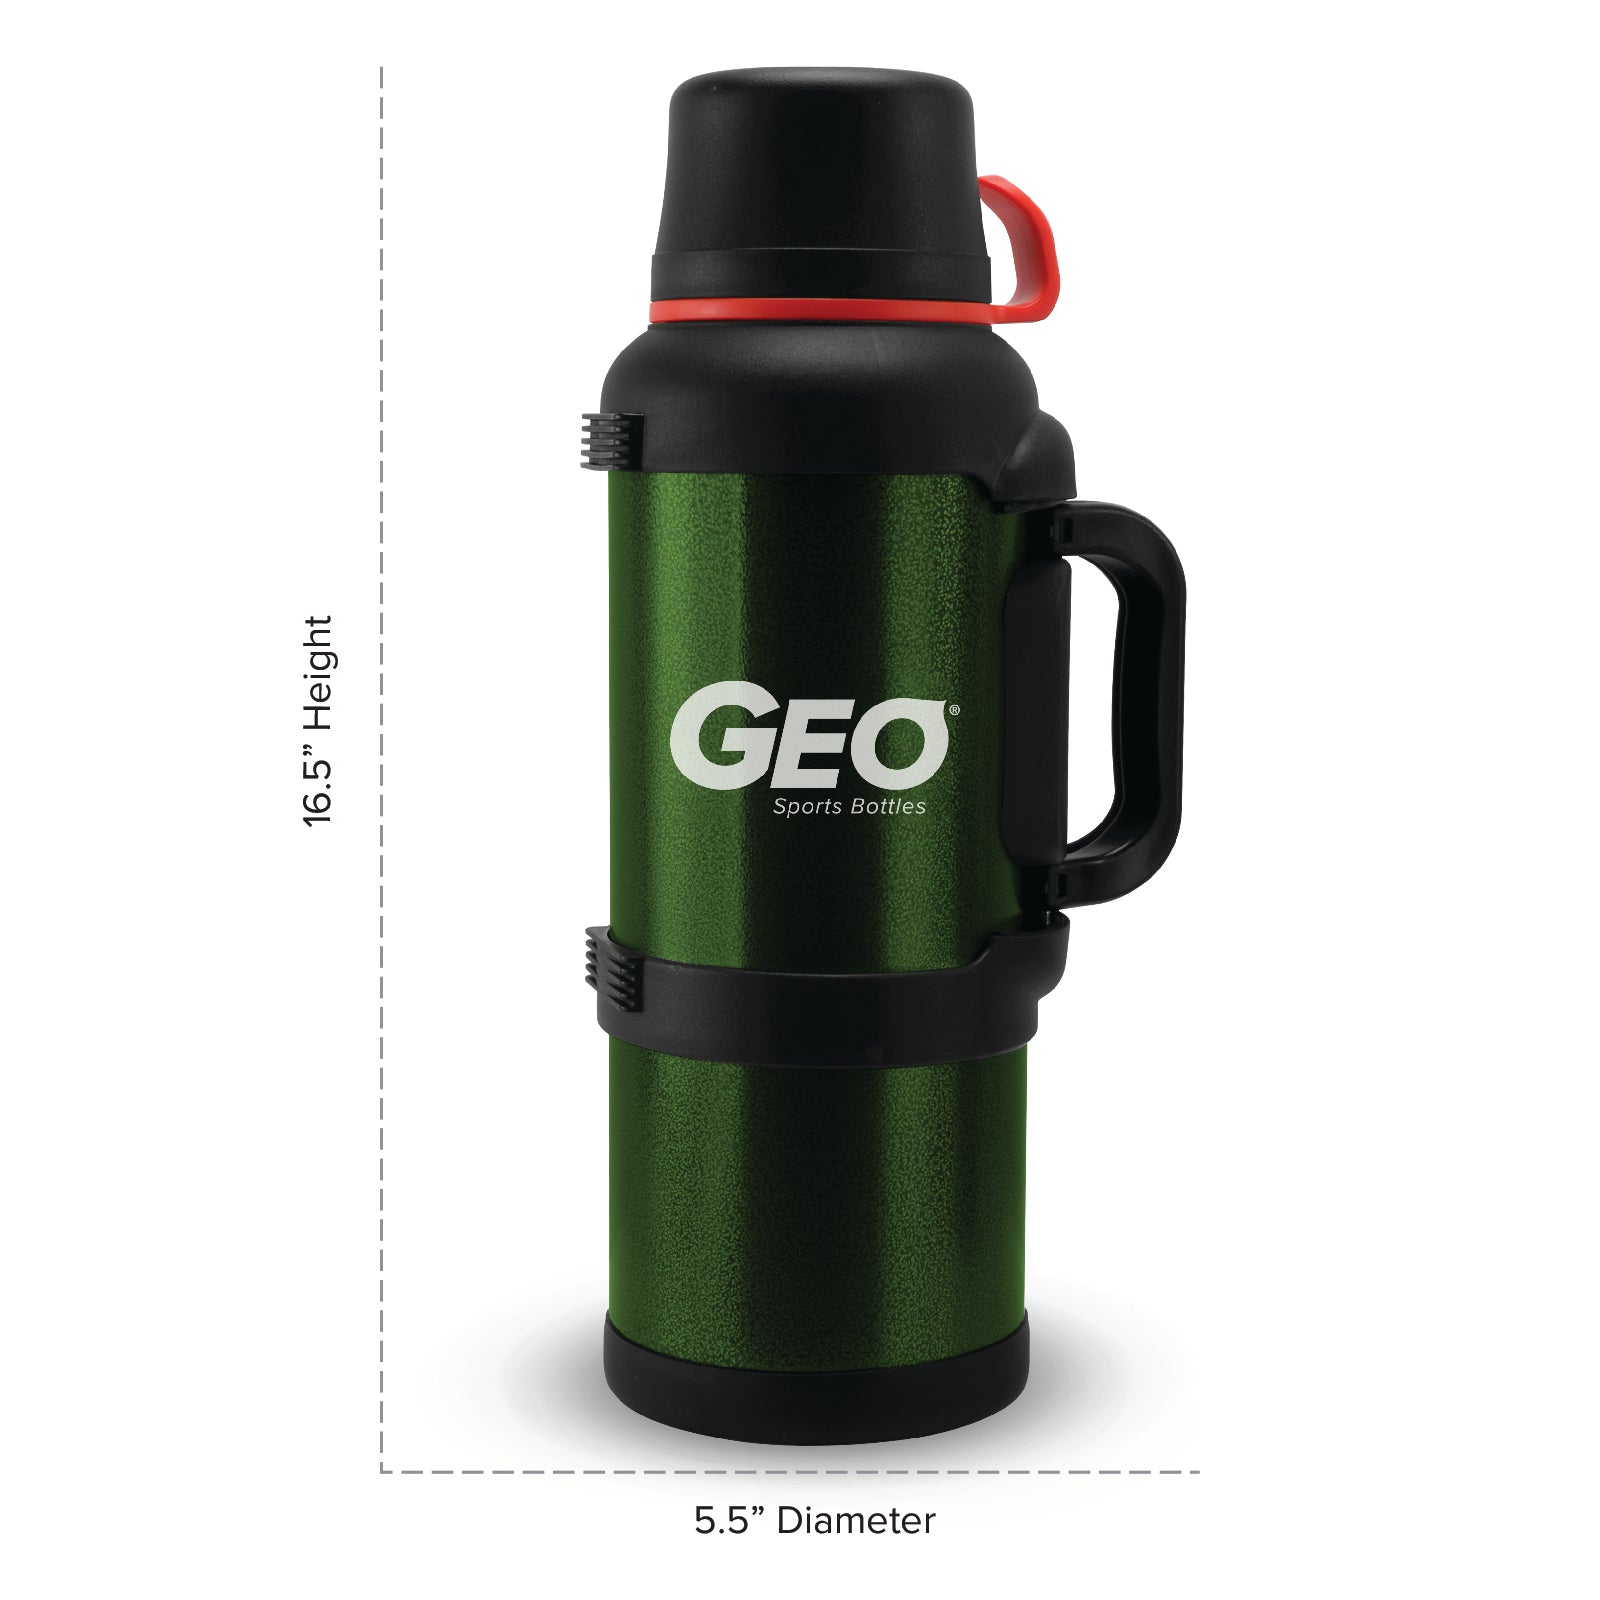 2 Liter Water Bottle Stainless Steel Thermos Bottle Outdoor Sports